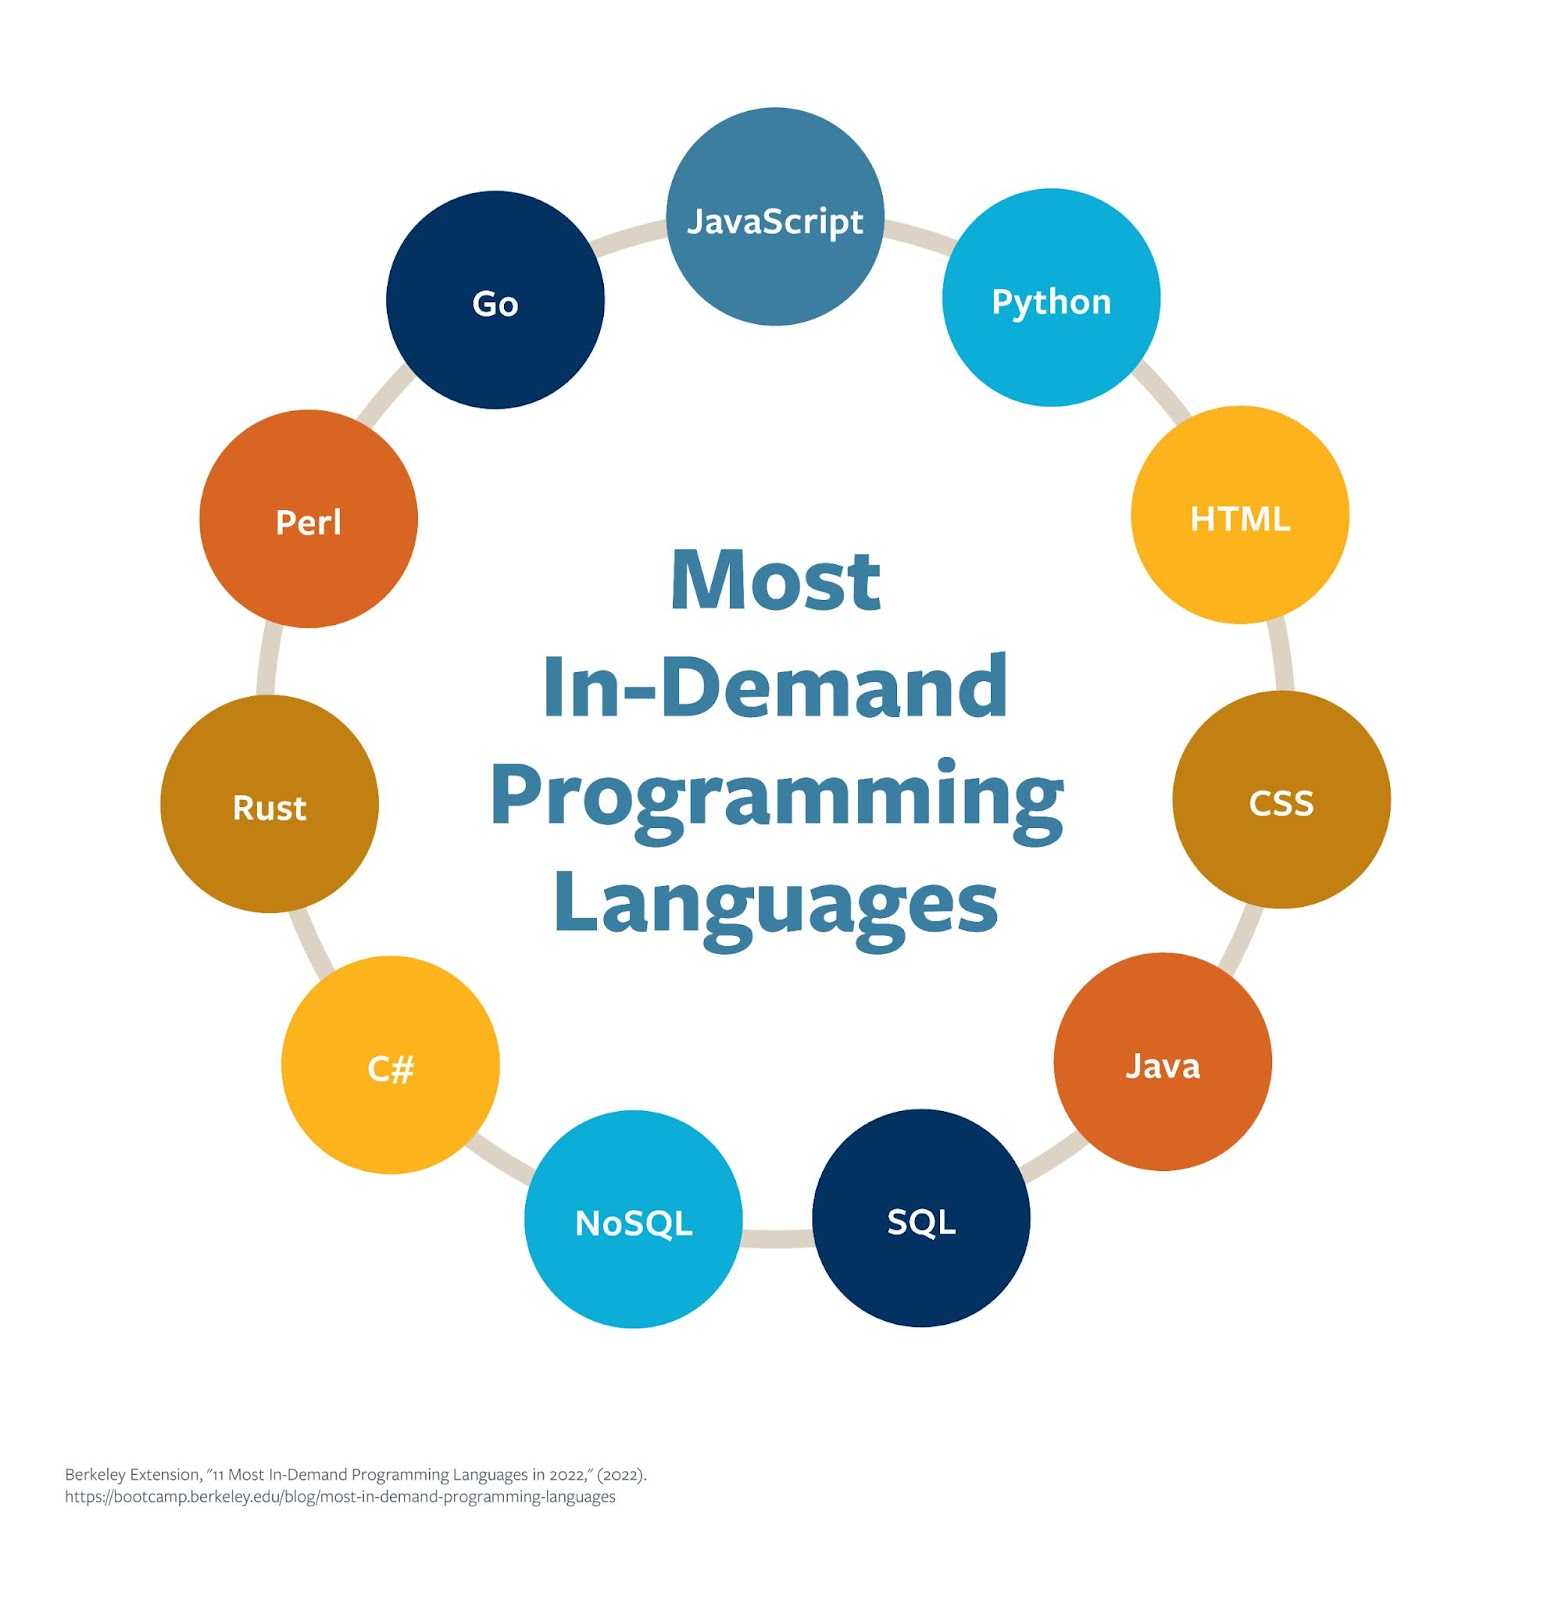 An image highlighting the most in-demand programming languages.